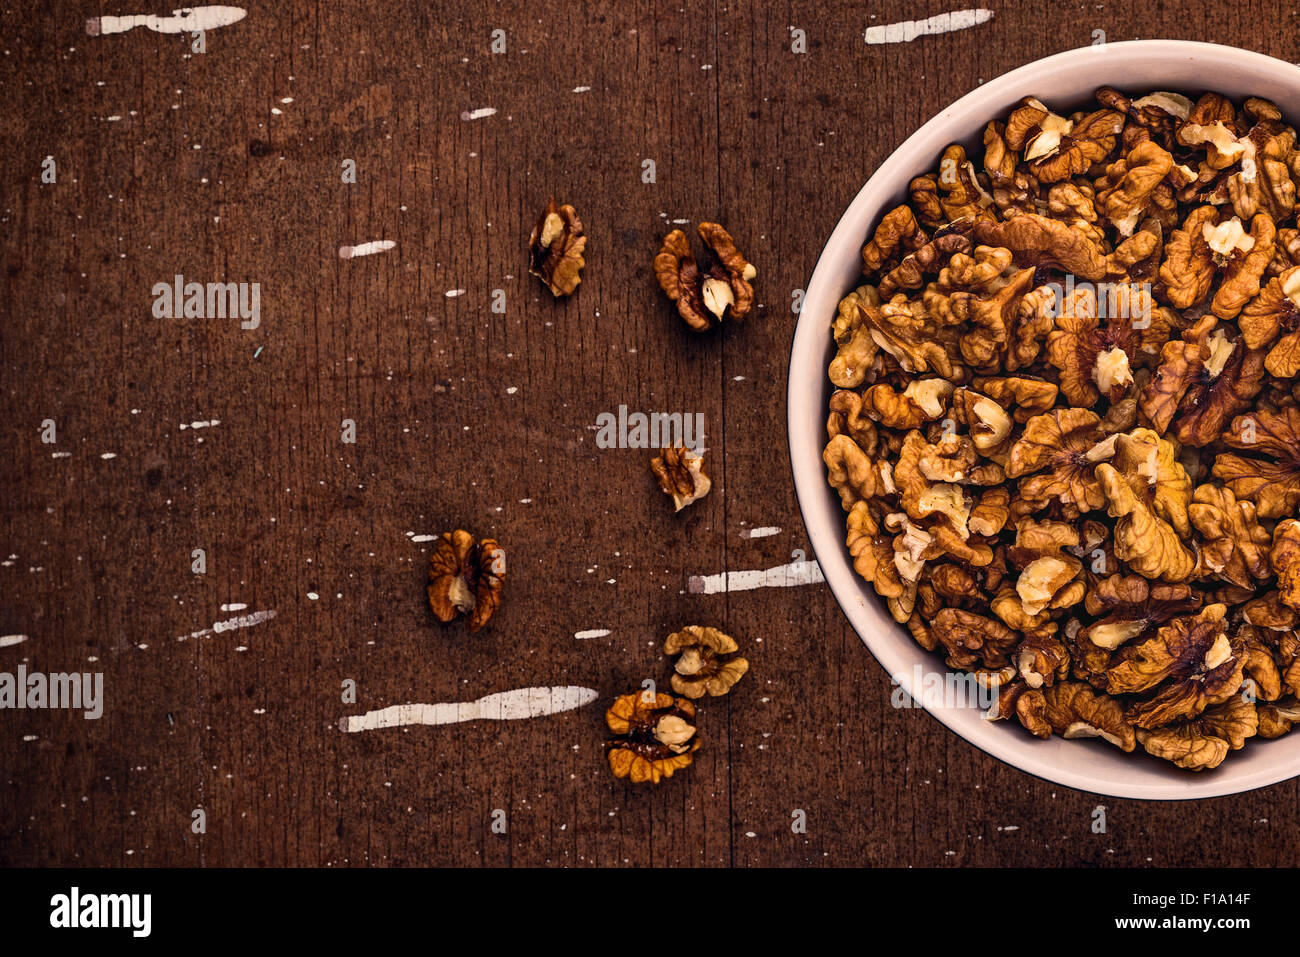 Peeled Walnut Kernels in Ceramic Bowl on Brown Rustic Wood Plank Background, Top View Stock Photo